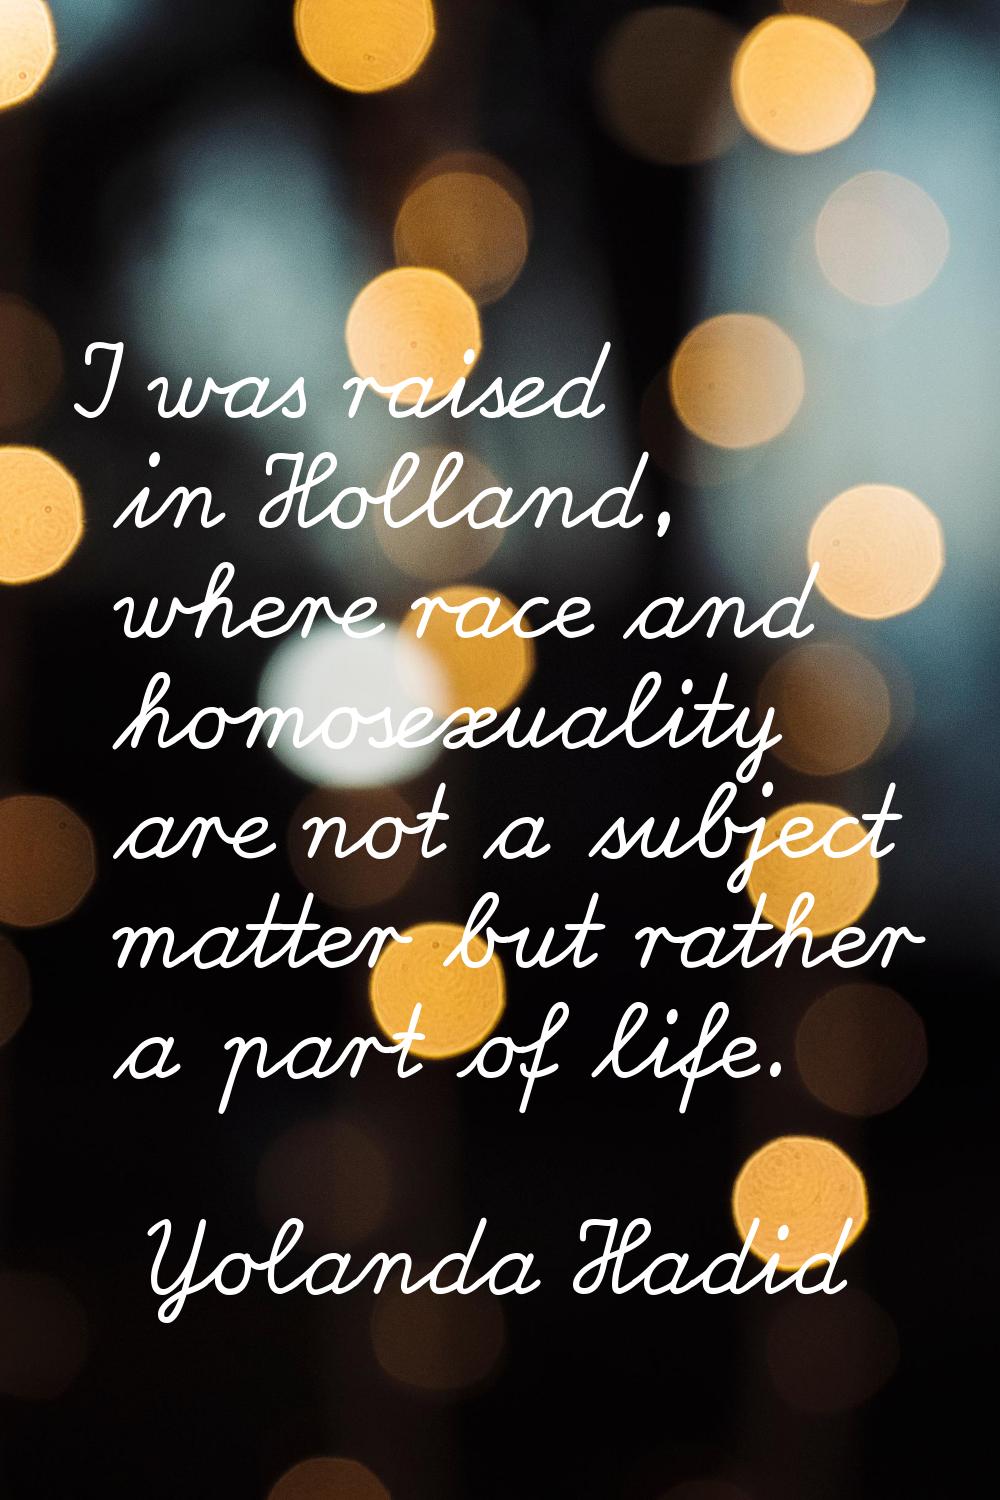 I was raised in Holland, where race and homosexuality are not a subject matter but rather a part of